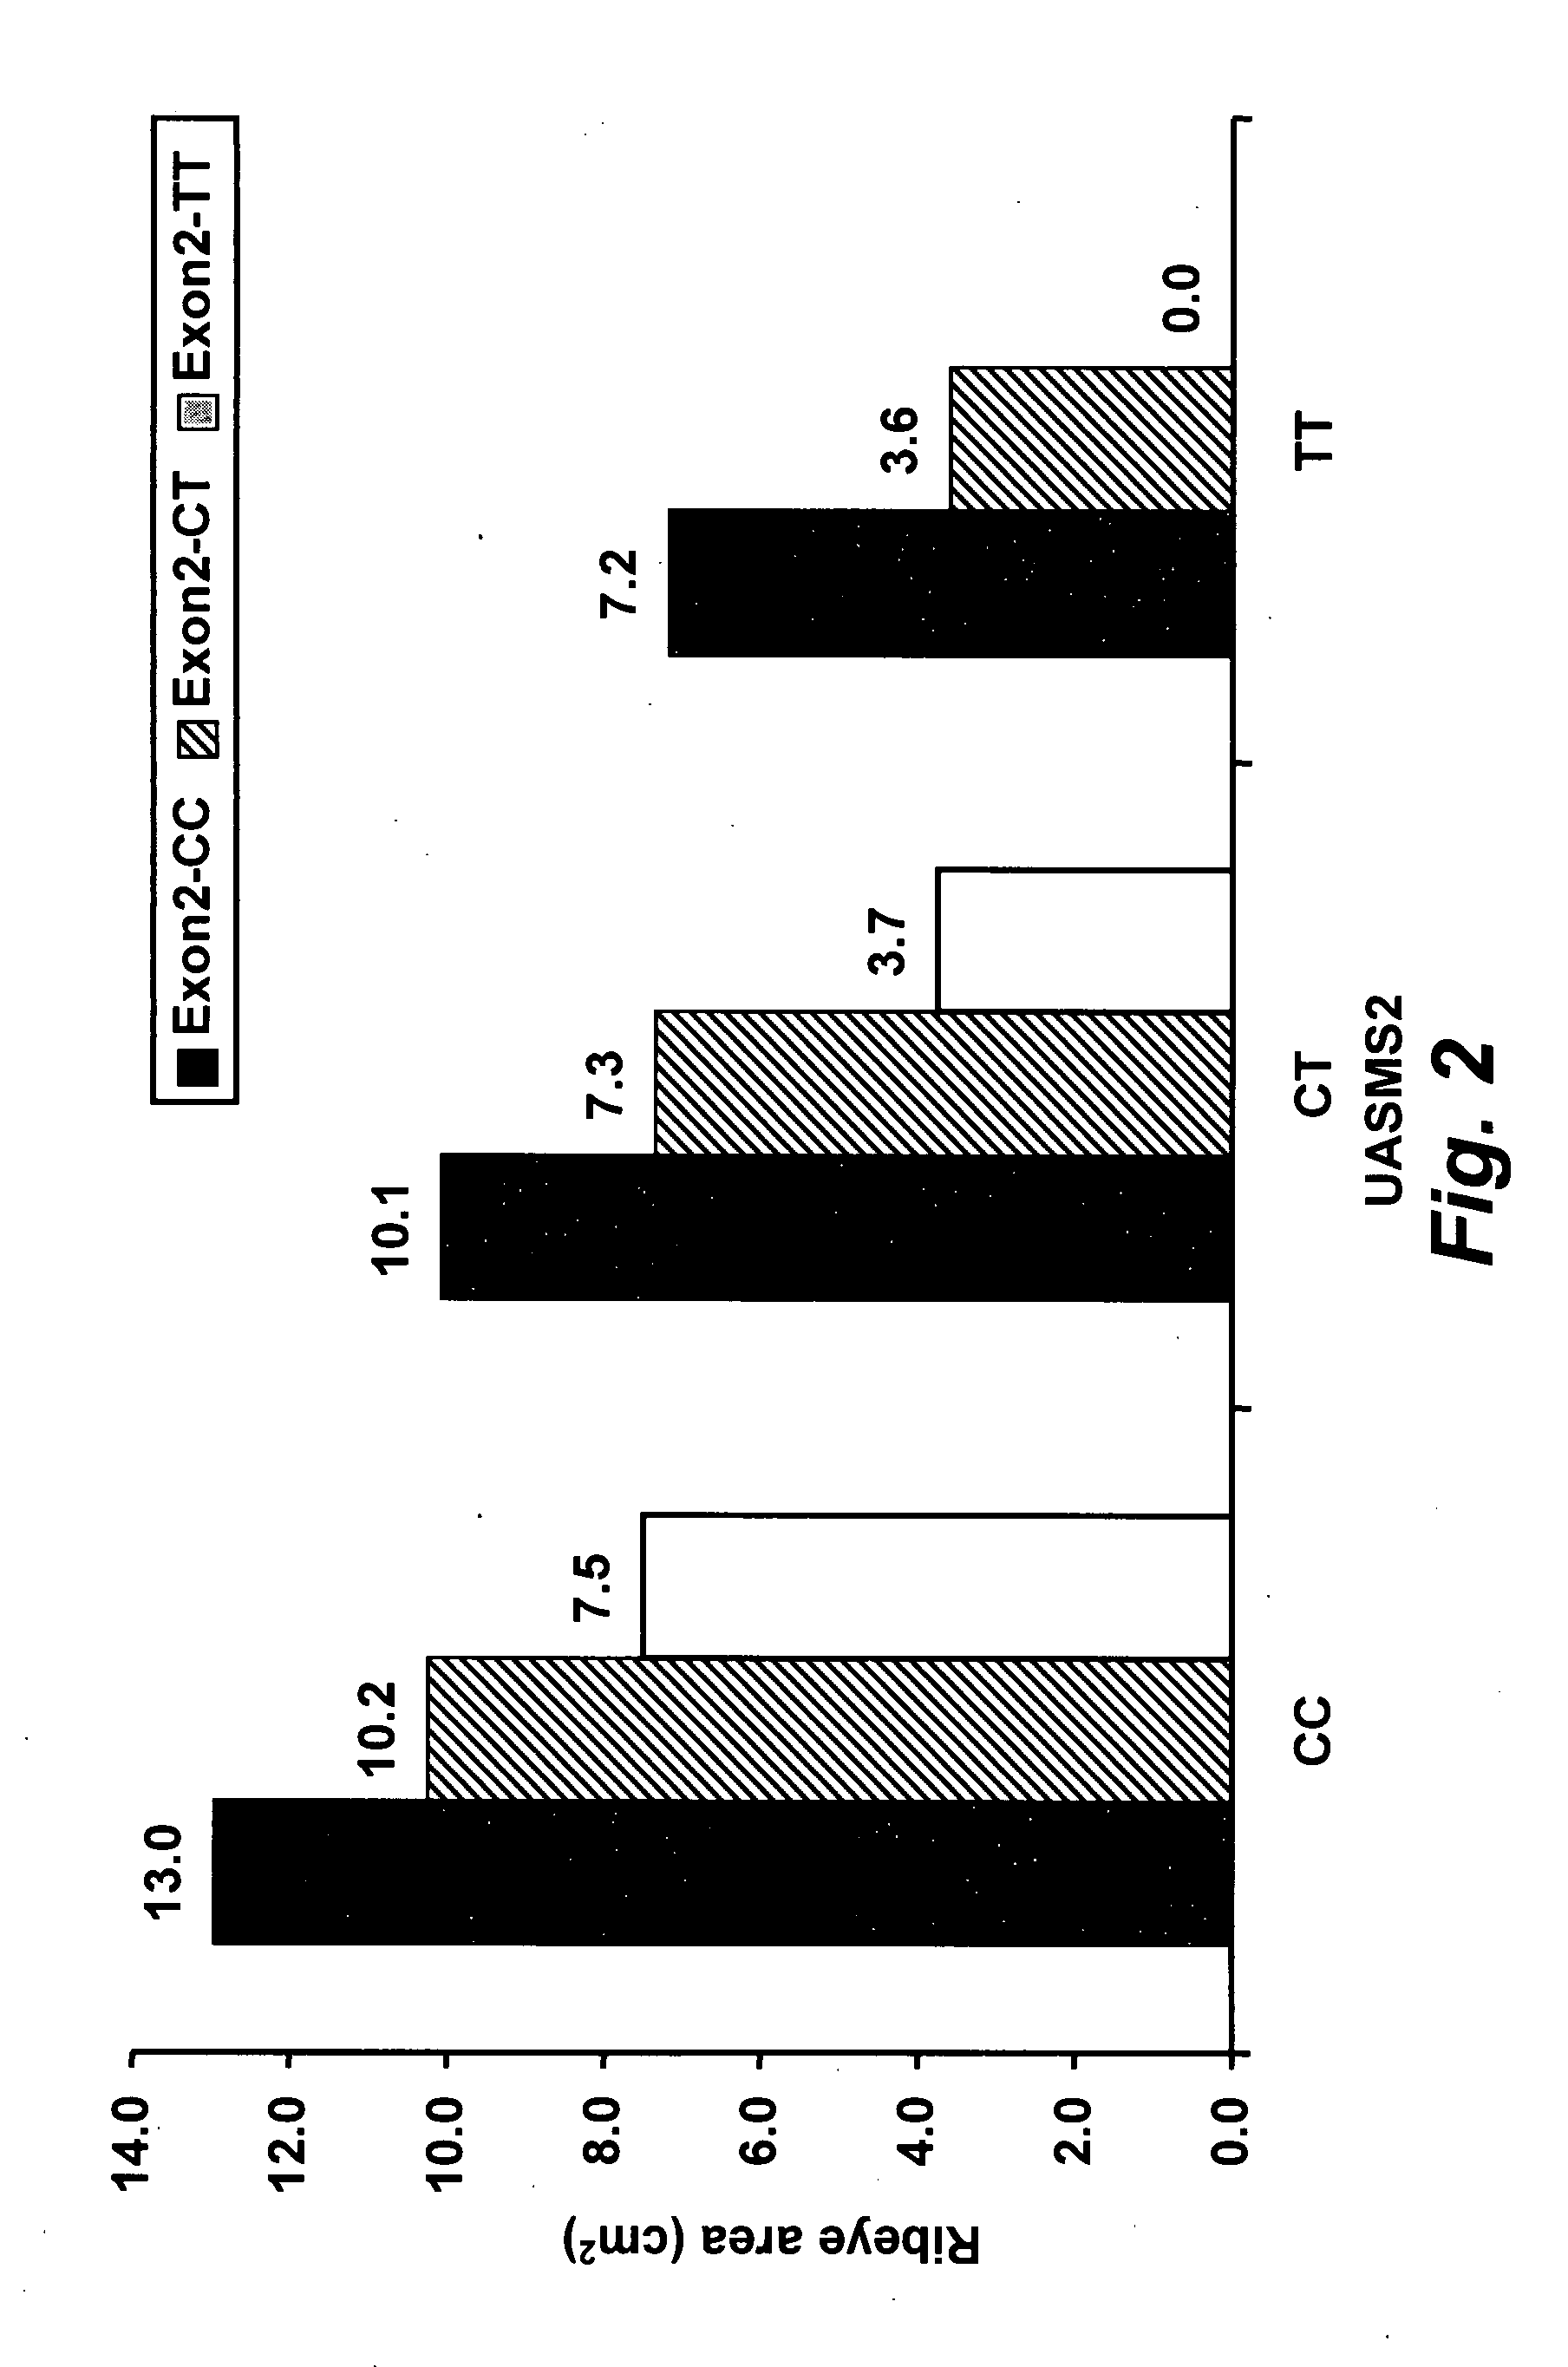 Systems and methods for predicting a livestock marketing method